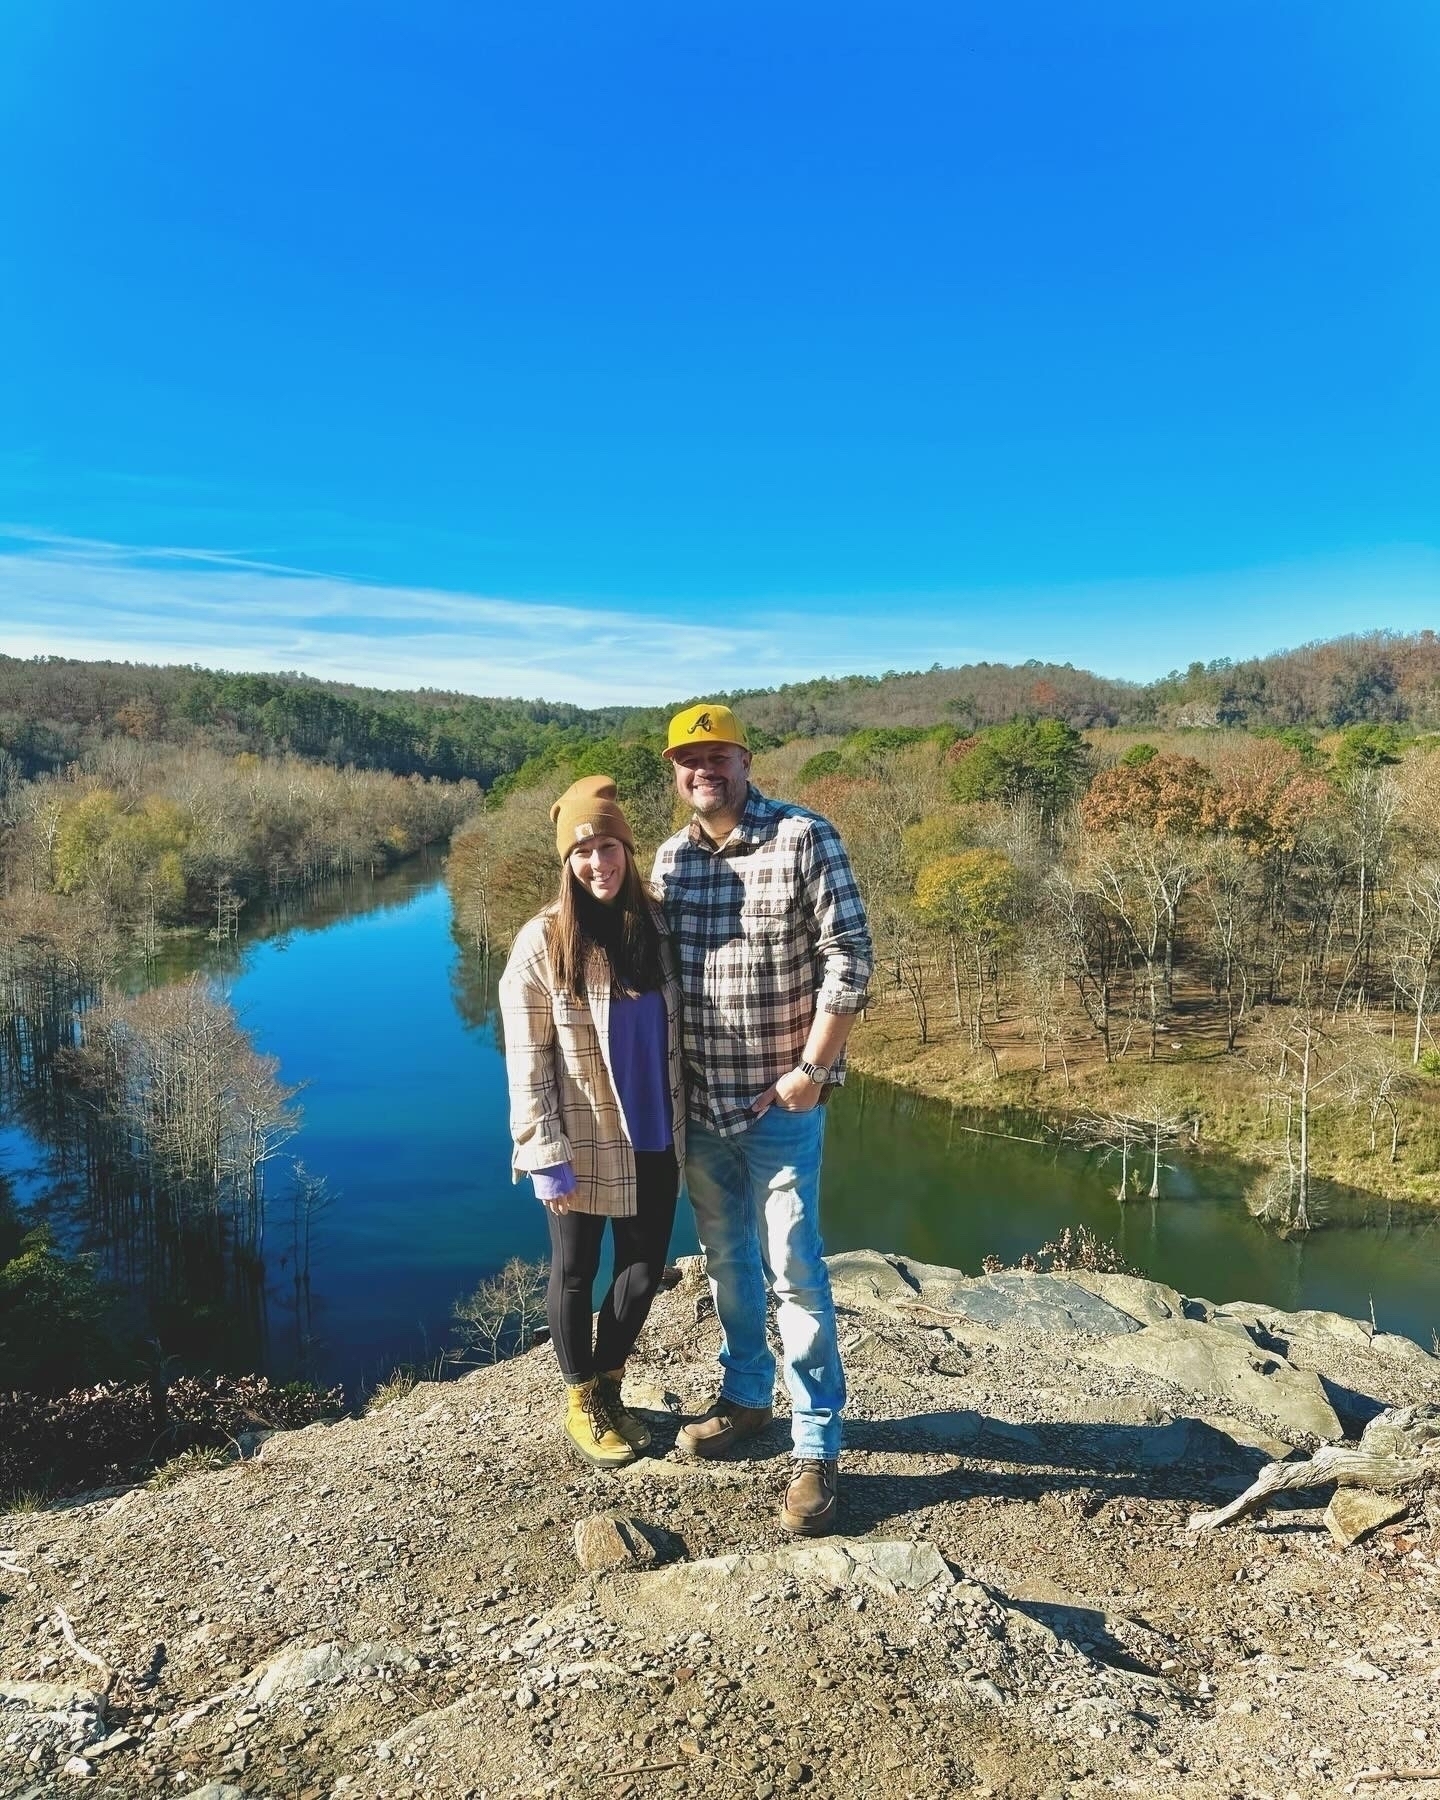 Matt and Kalena, dressed in casual outdoor attire stand on a rocky overlook with a scenic river and forest landscape in the background.